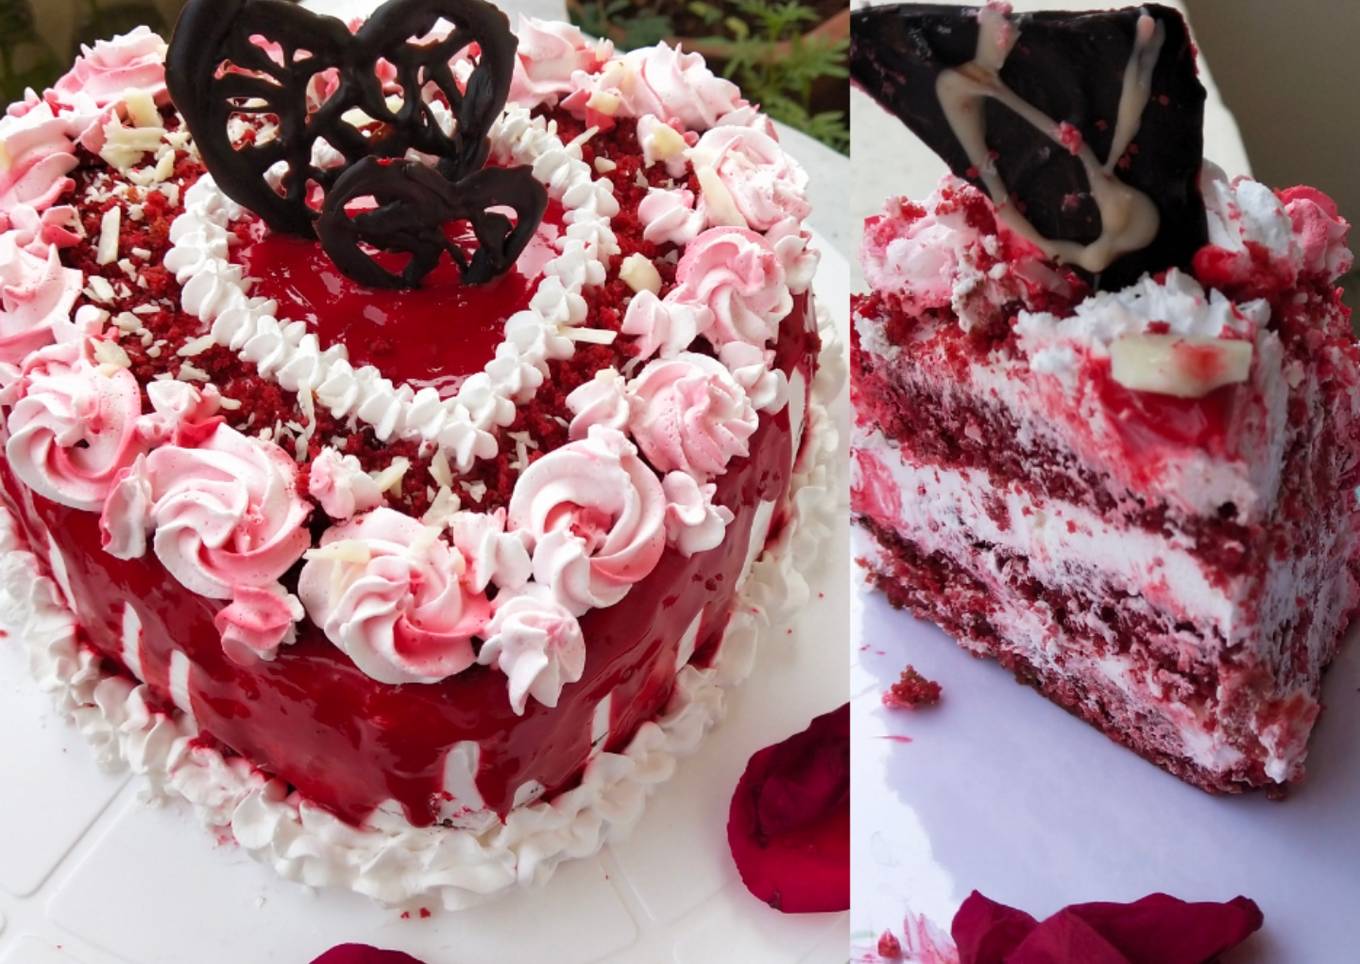 The Real classic Red velvet heart cake recipe without cream